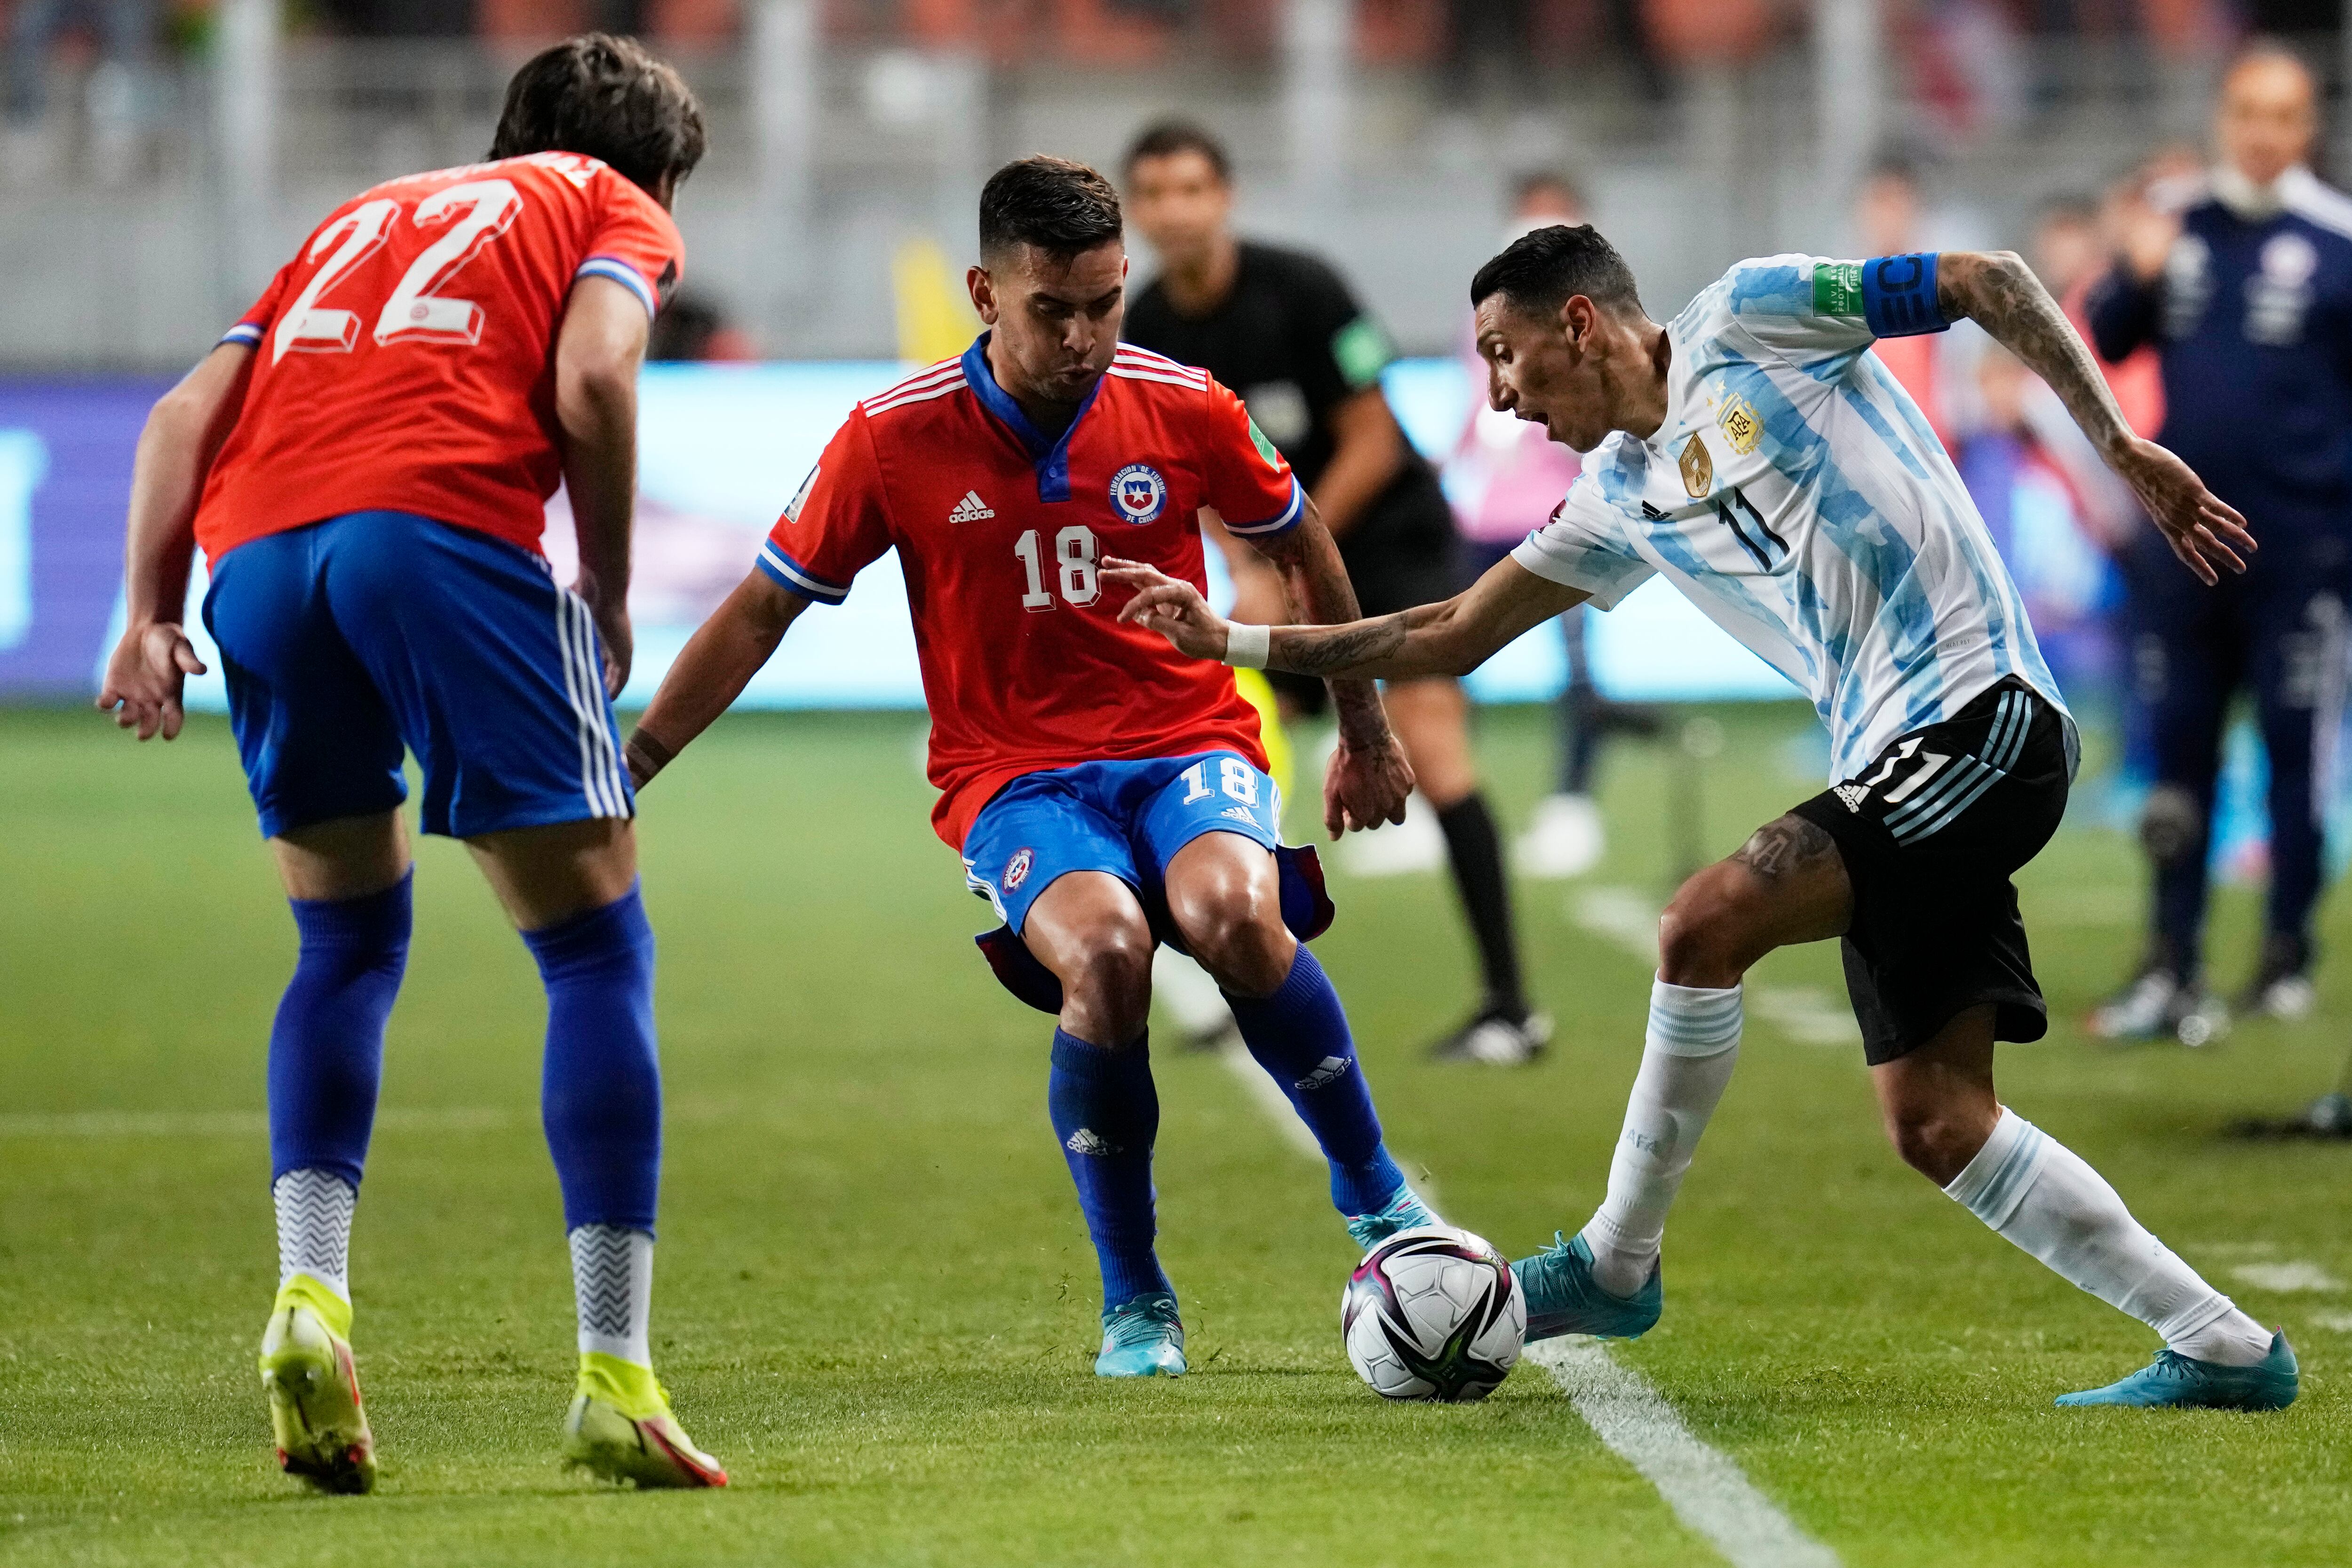 Ángel Di María dribbles in front of Sebastián Vargas in a January 2022 match in Calama, Chile.